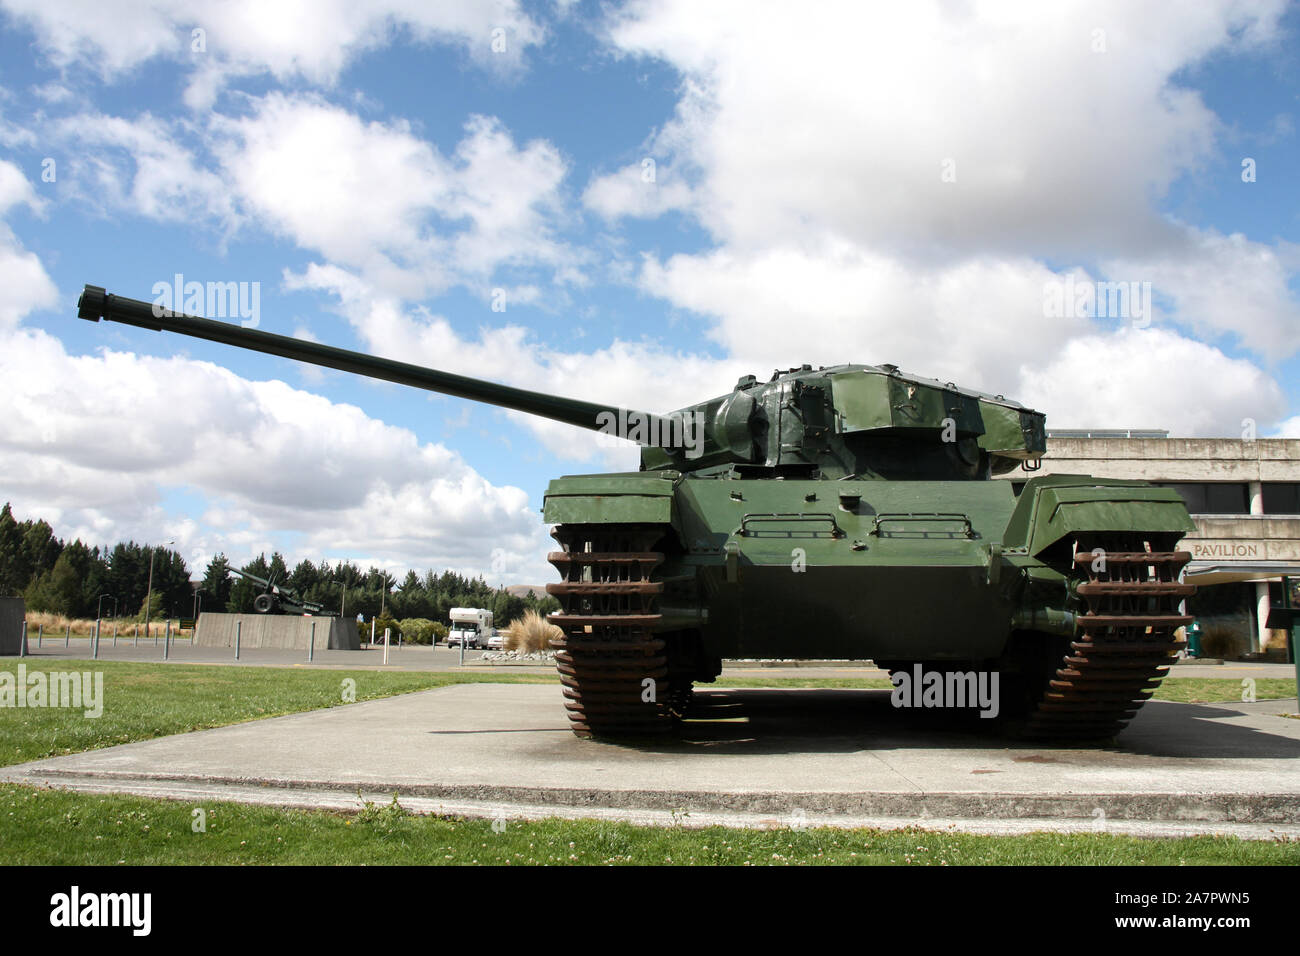 A41 Centurion battle tank on display at the QEII Army Memorial Museum - Waiouru, New Zealand. Stock Photo